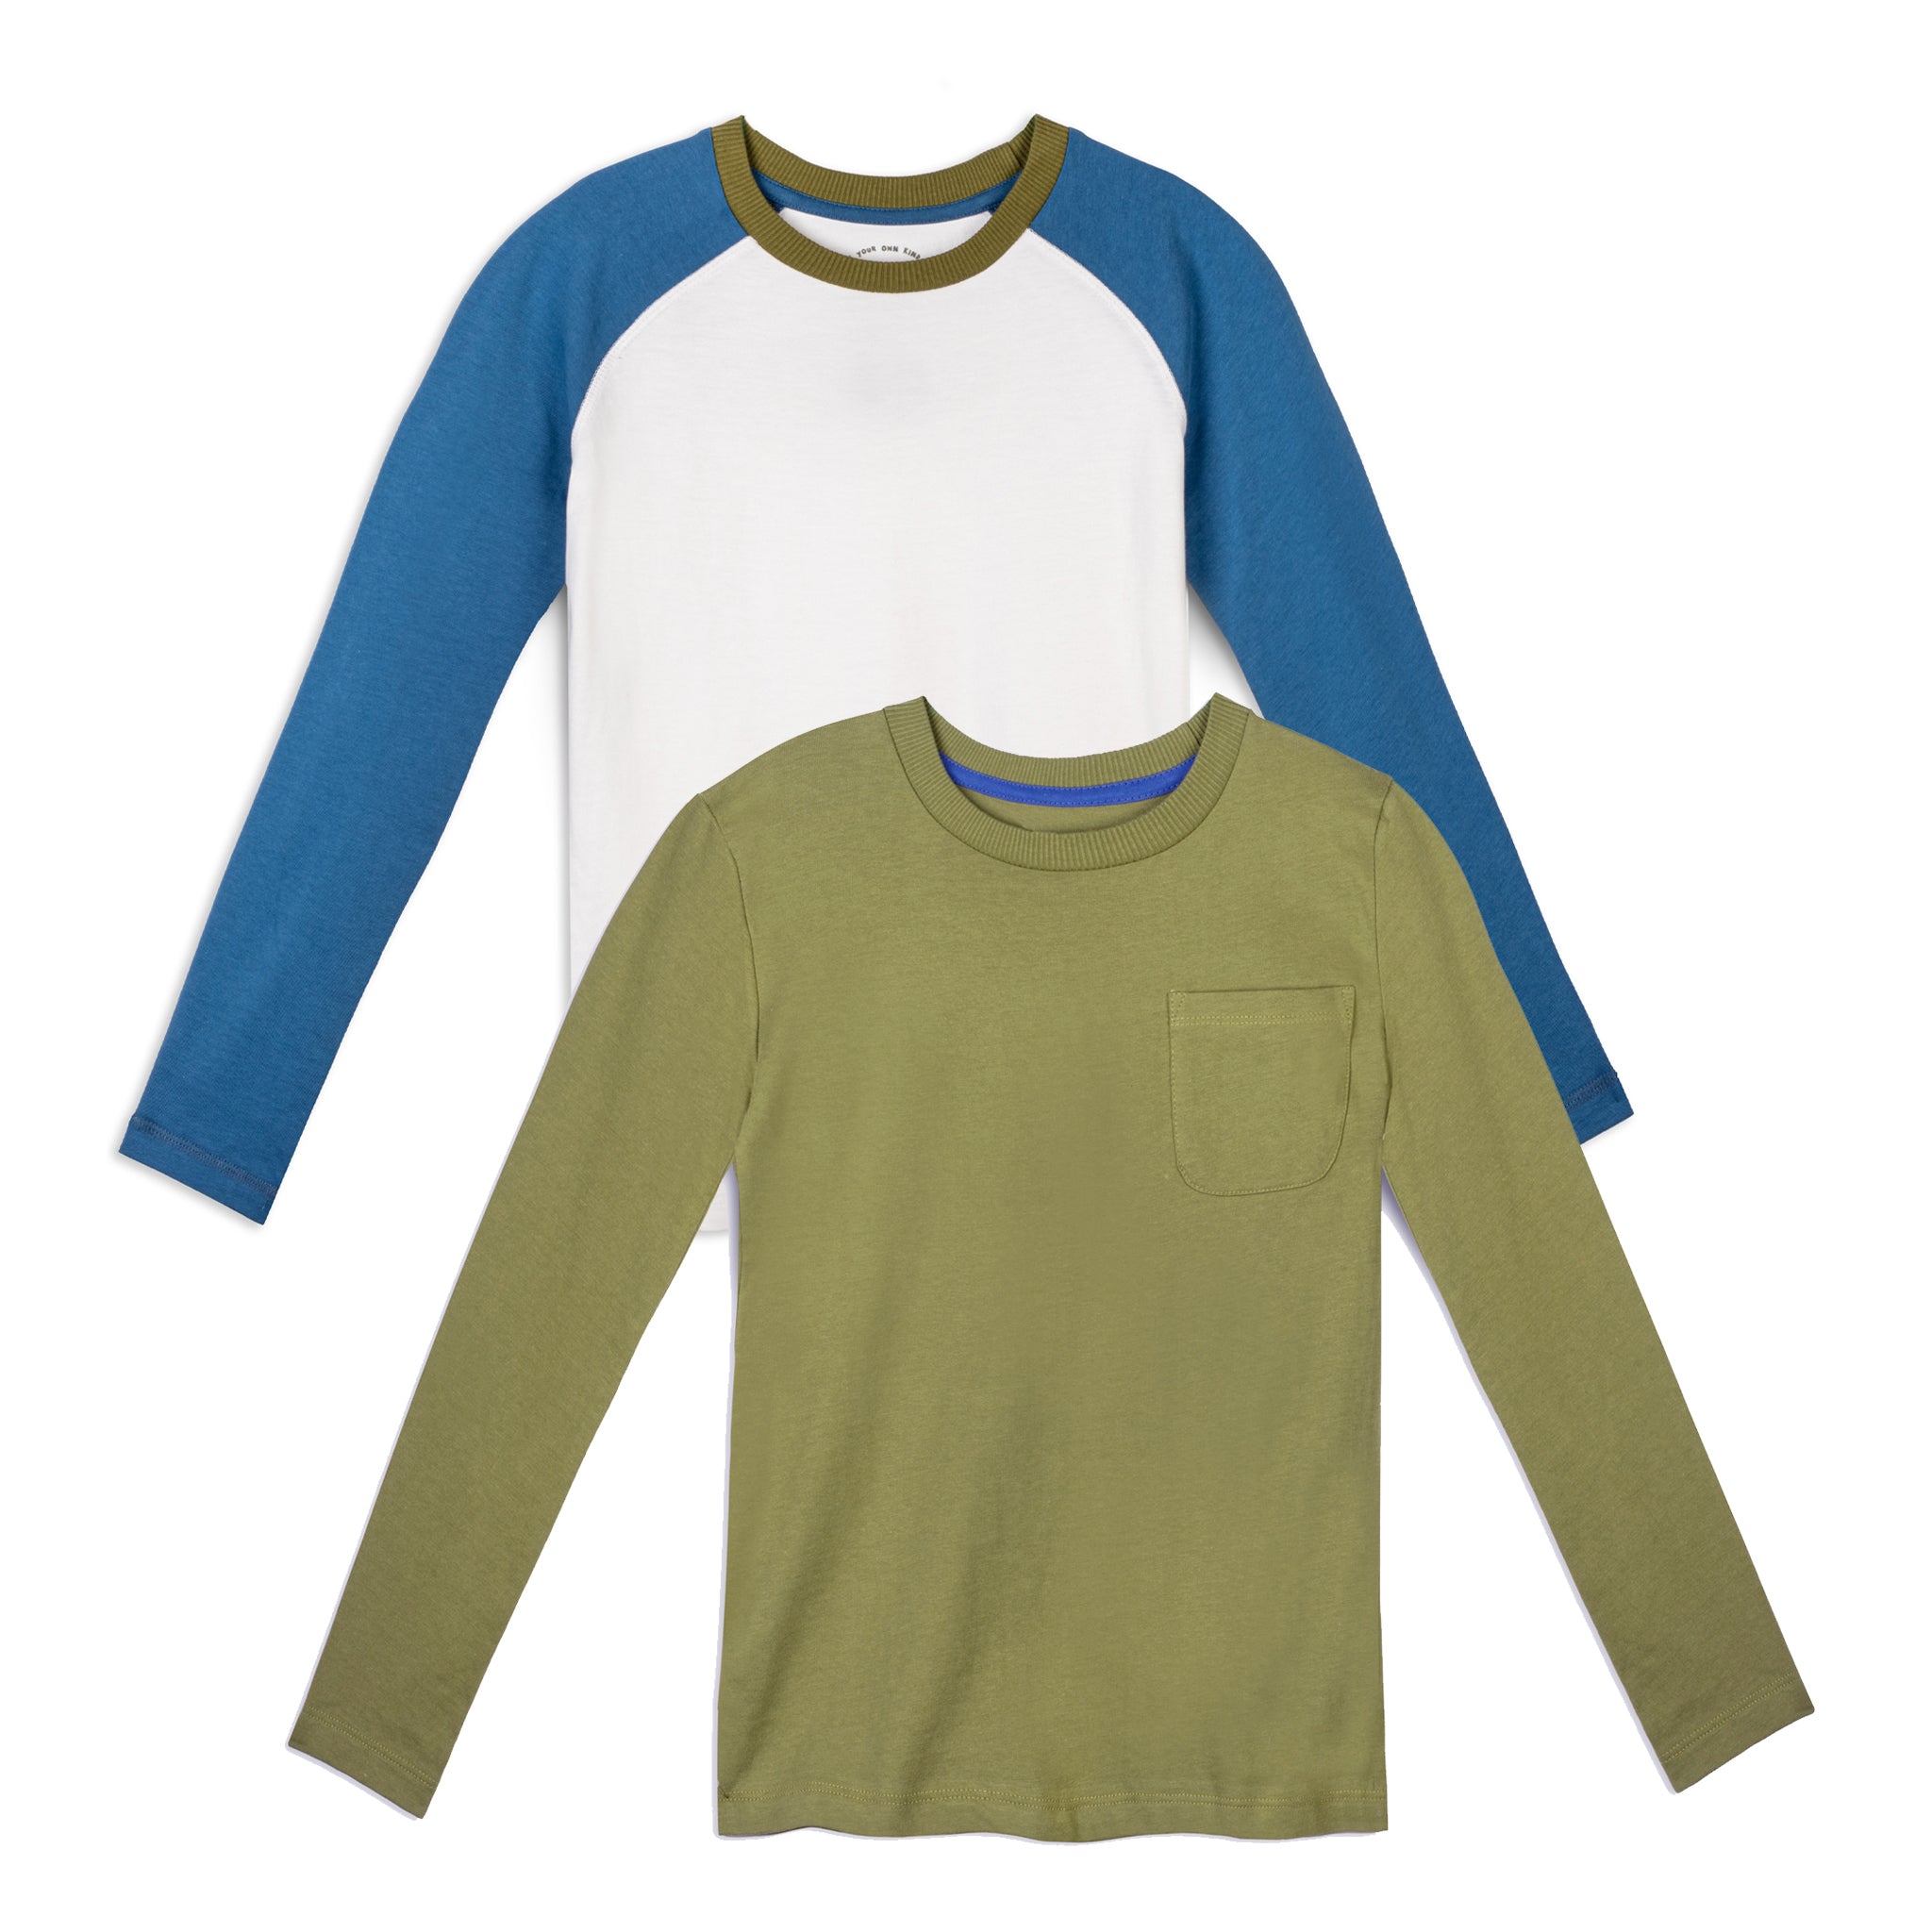 The Children's Place Boys Long Sleeve Layering T-Shirts, 3-Pack